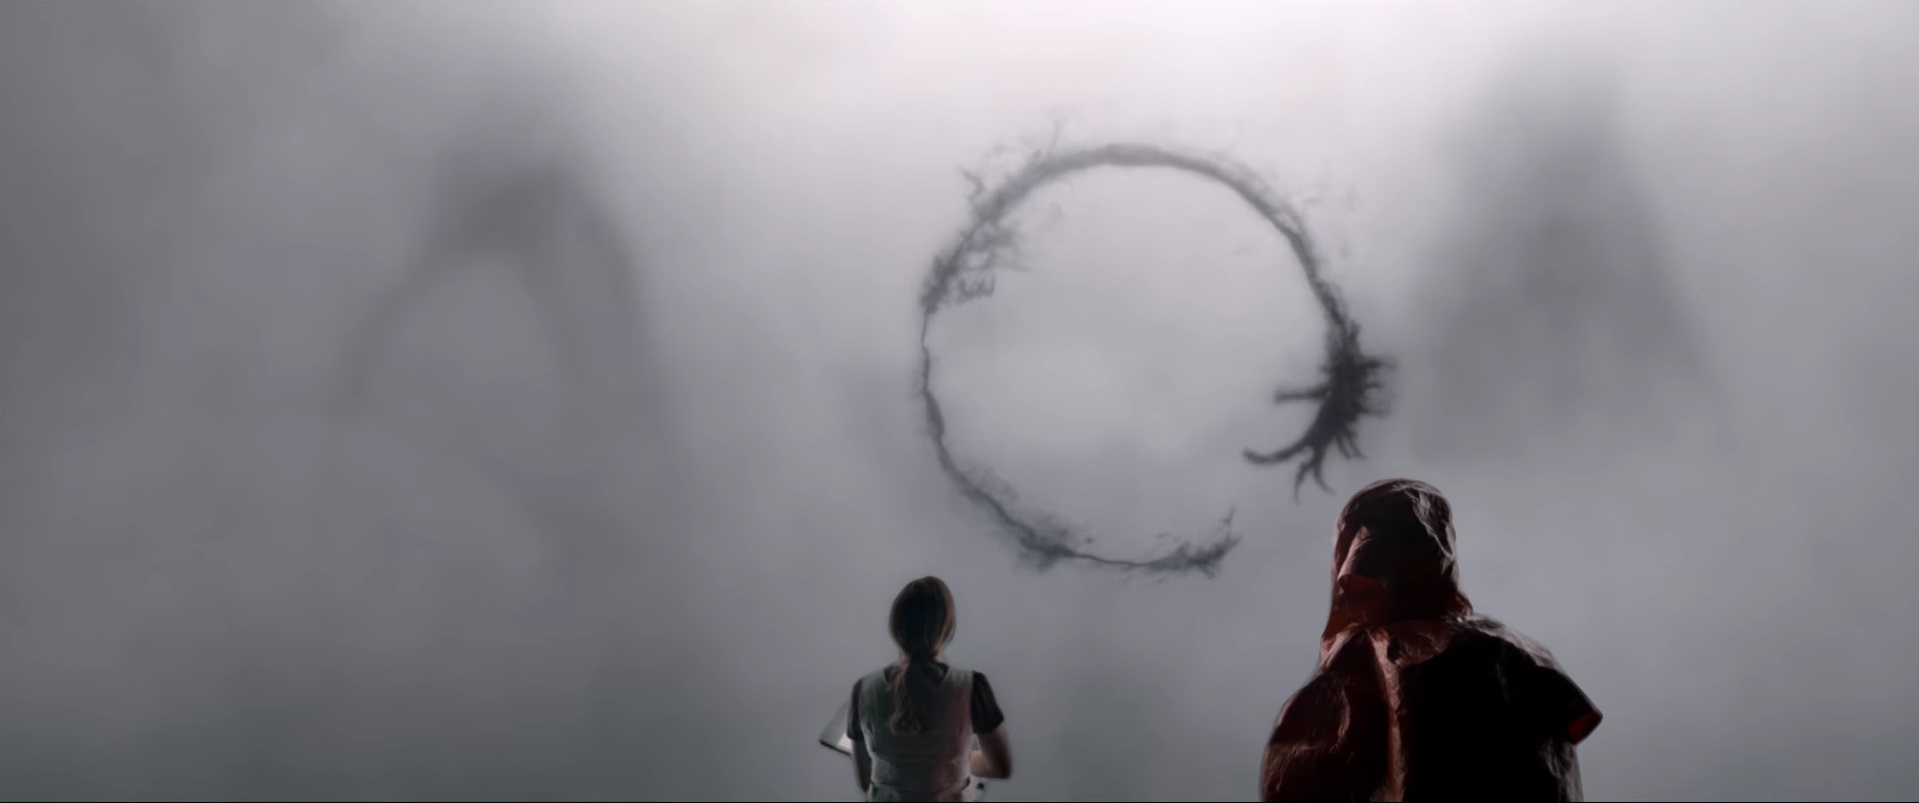 arrival-image-15